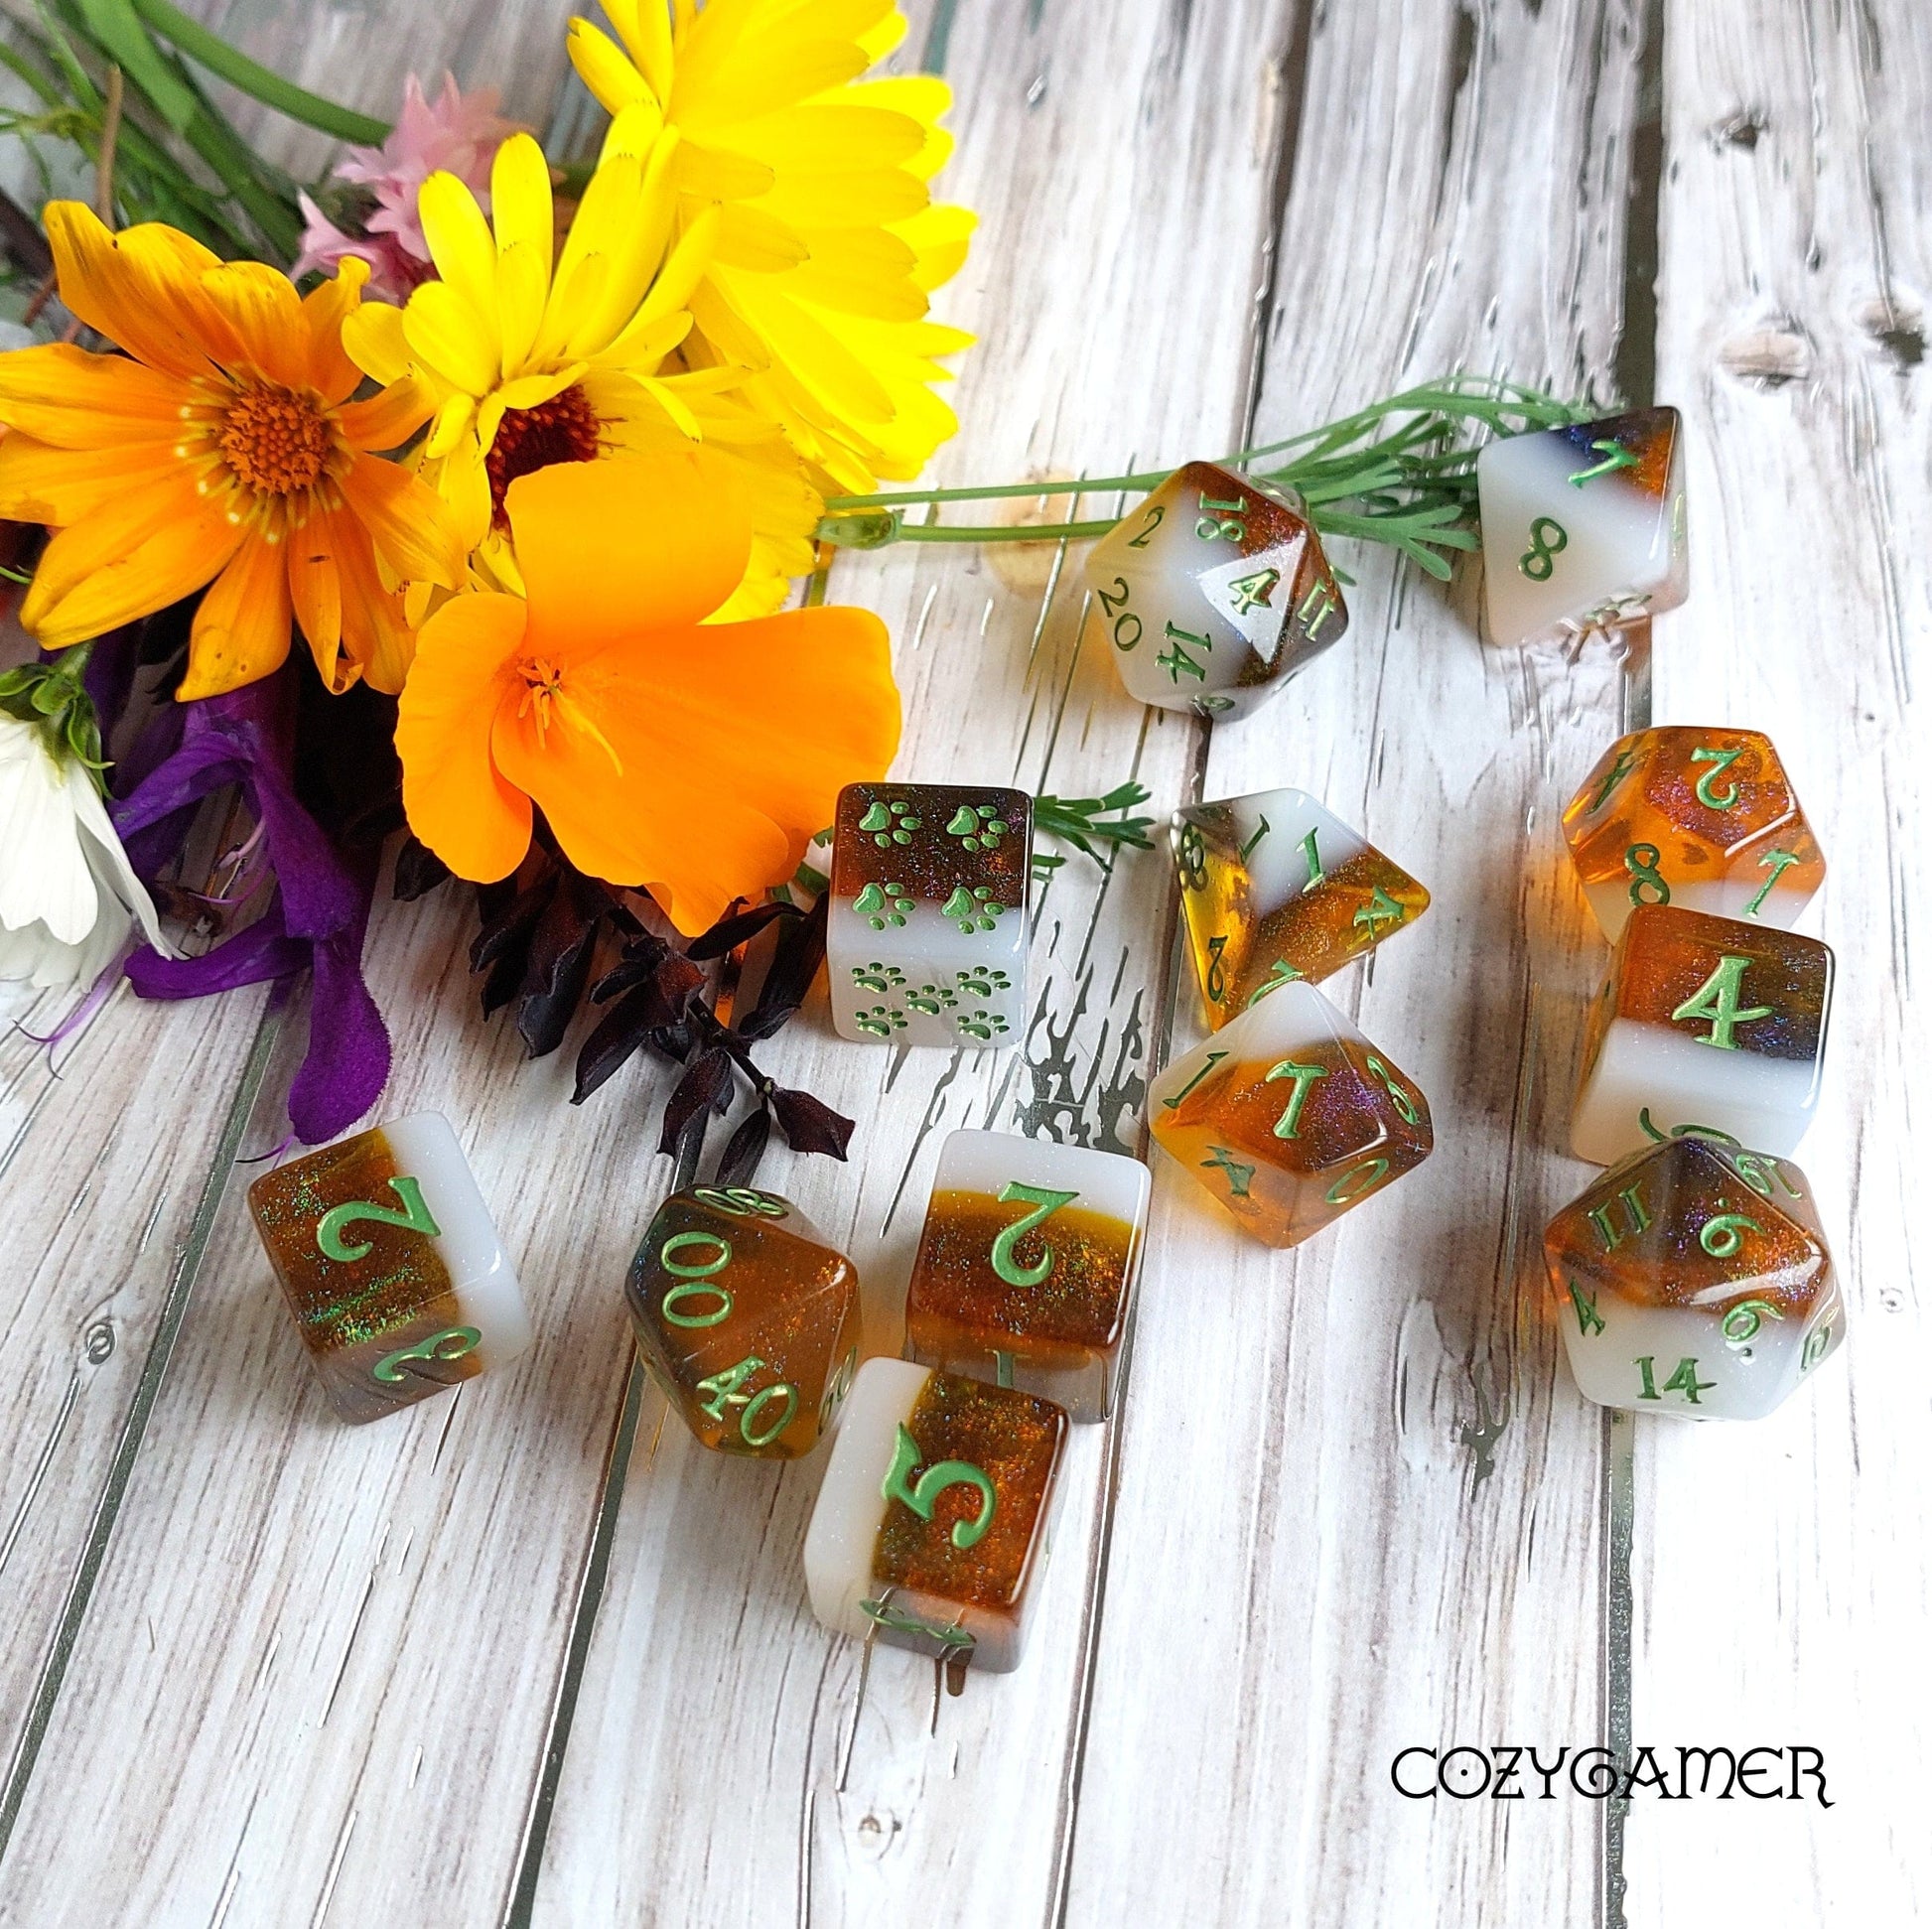 Calico Hazy IPA Dice Set, Beer themed DND Dice. 12 Piece, 8 Piece, D10, and D6 Sets